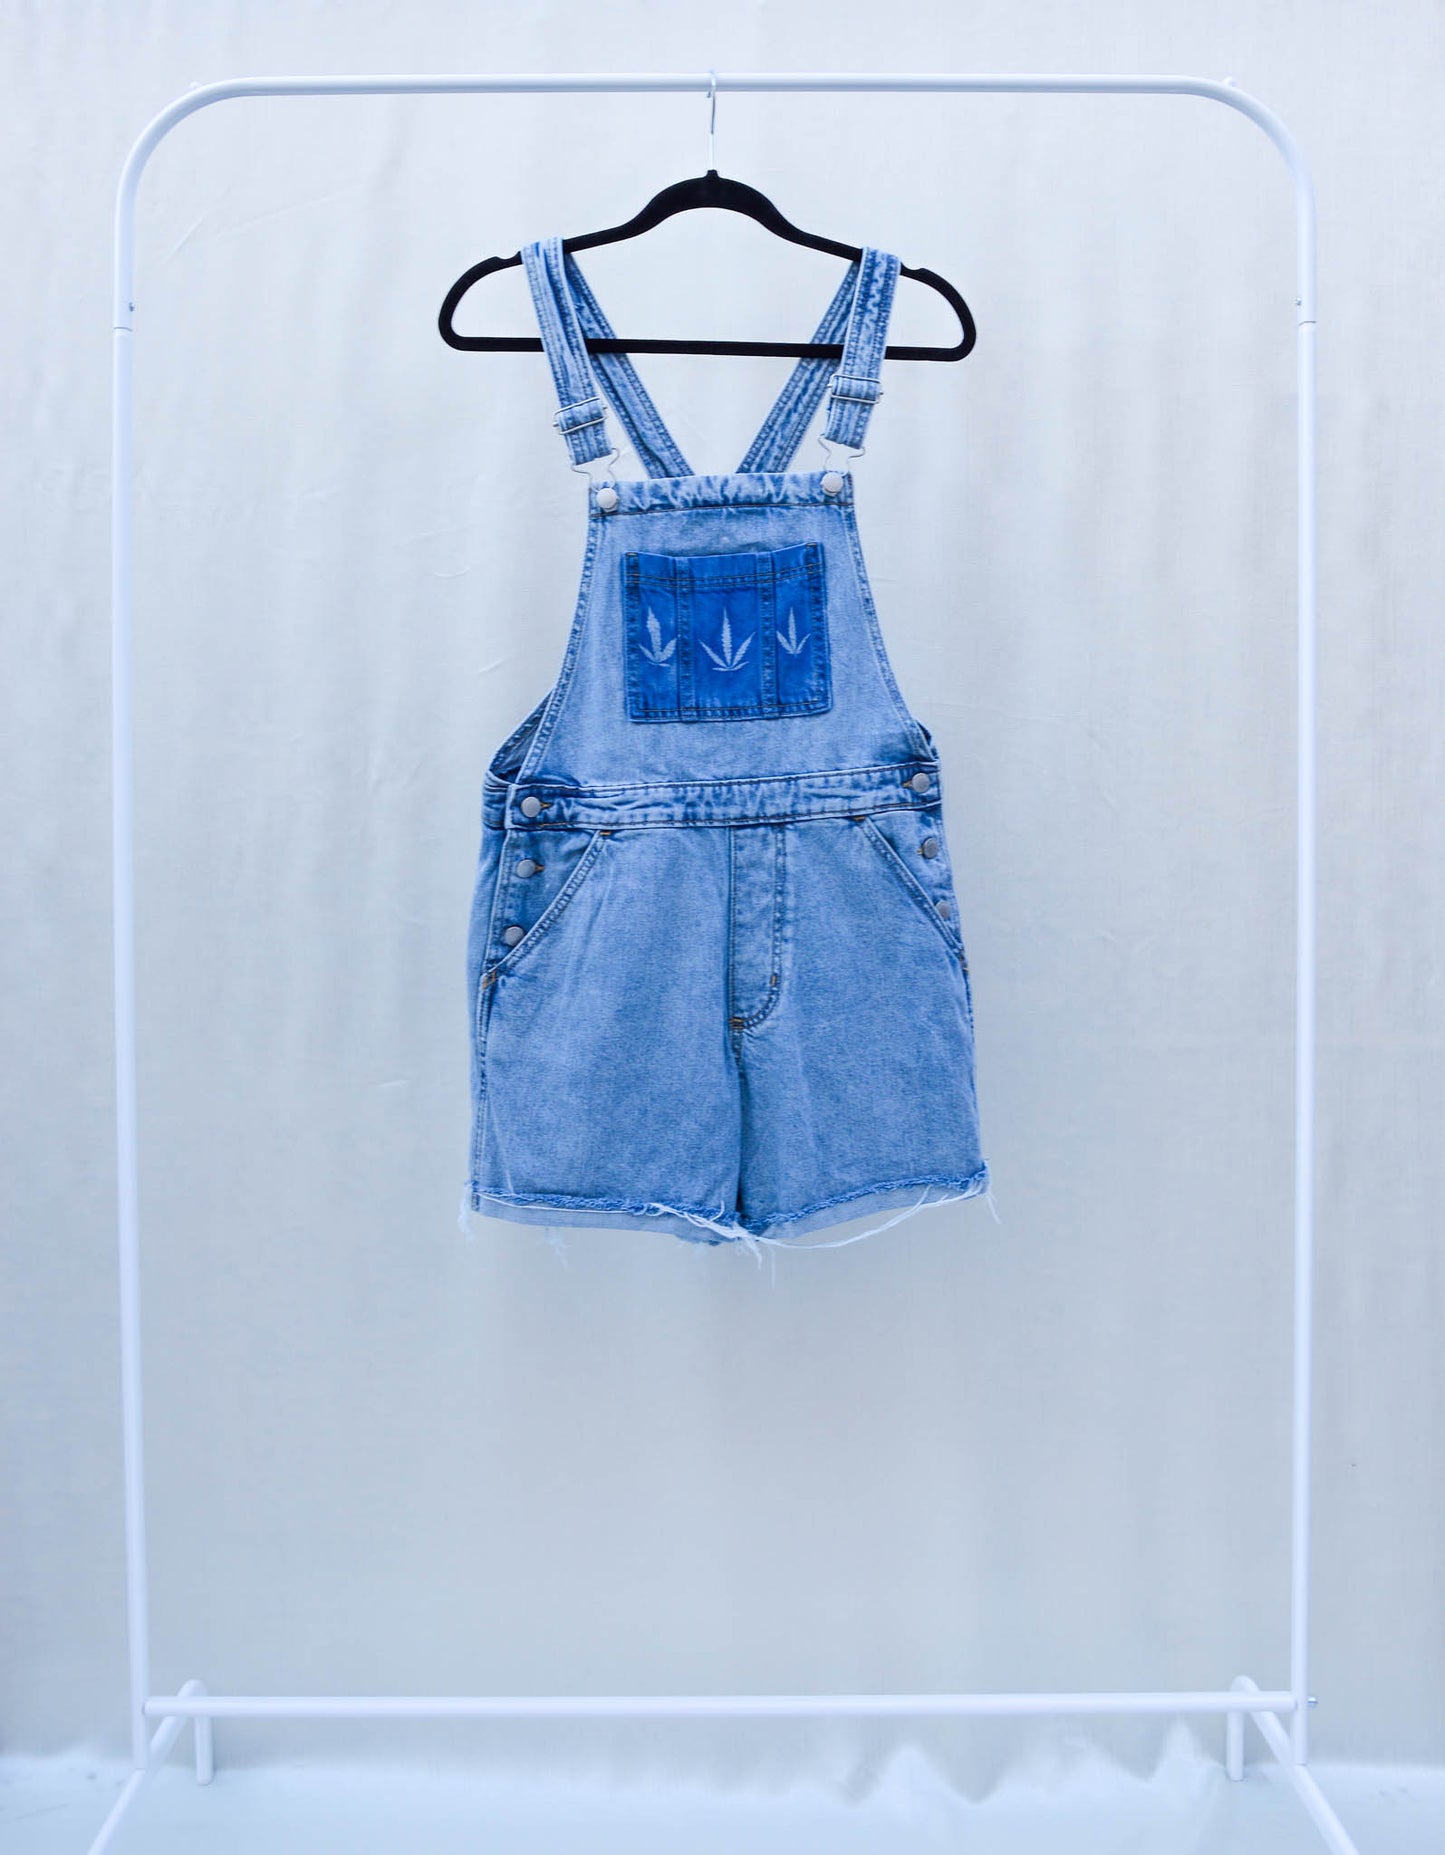 Women's X-Small Upcycled Denim Overalls